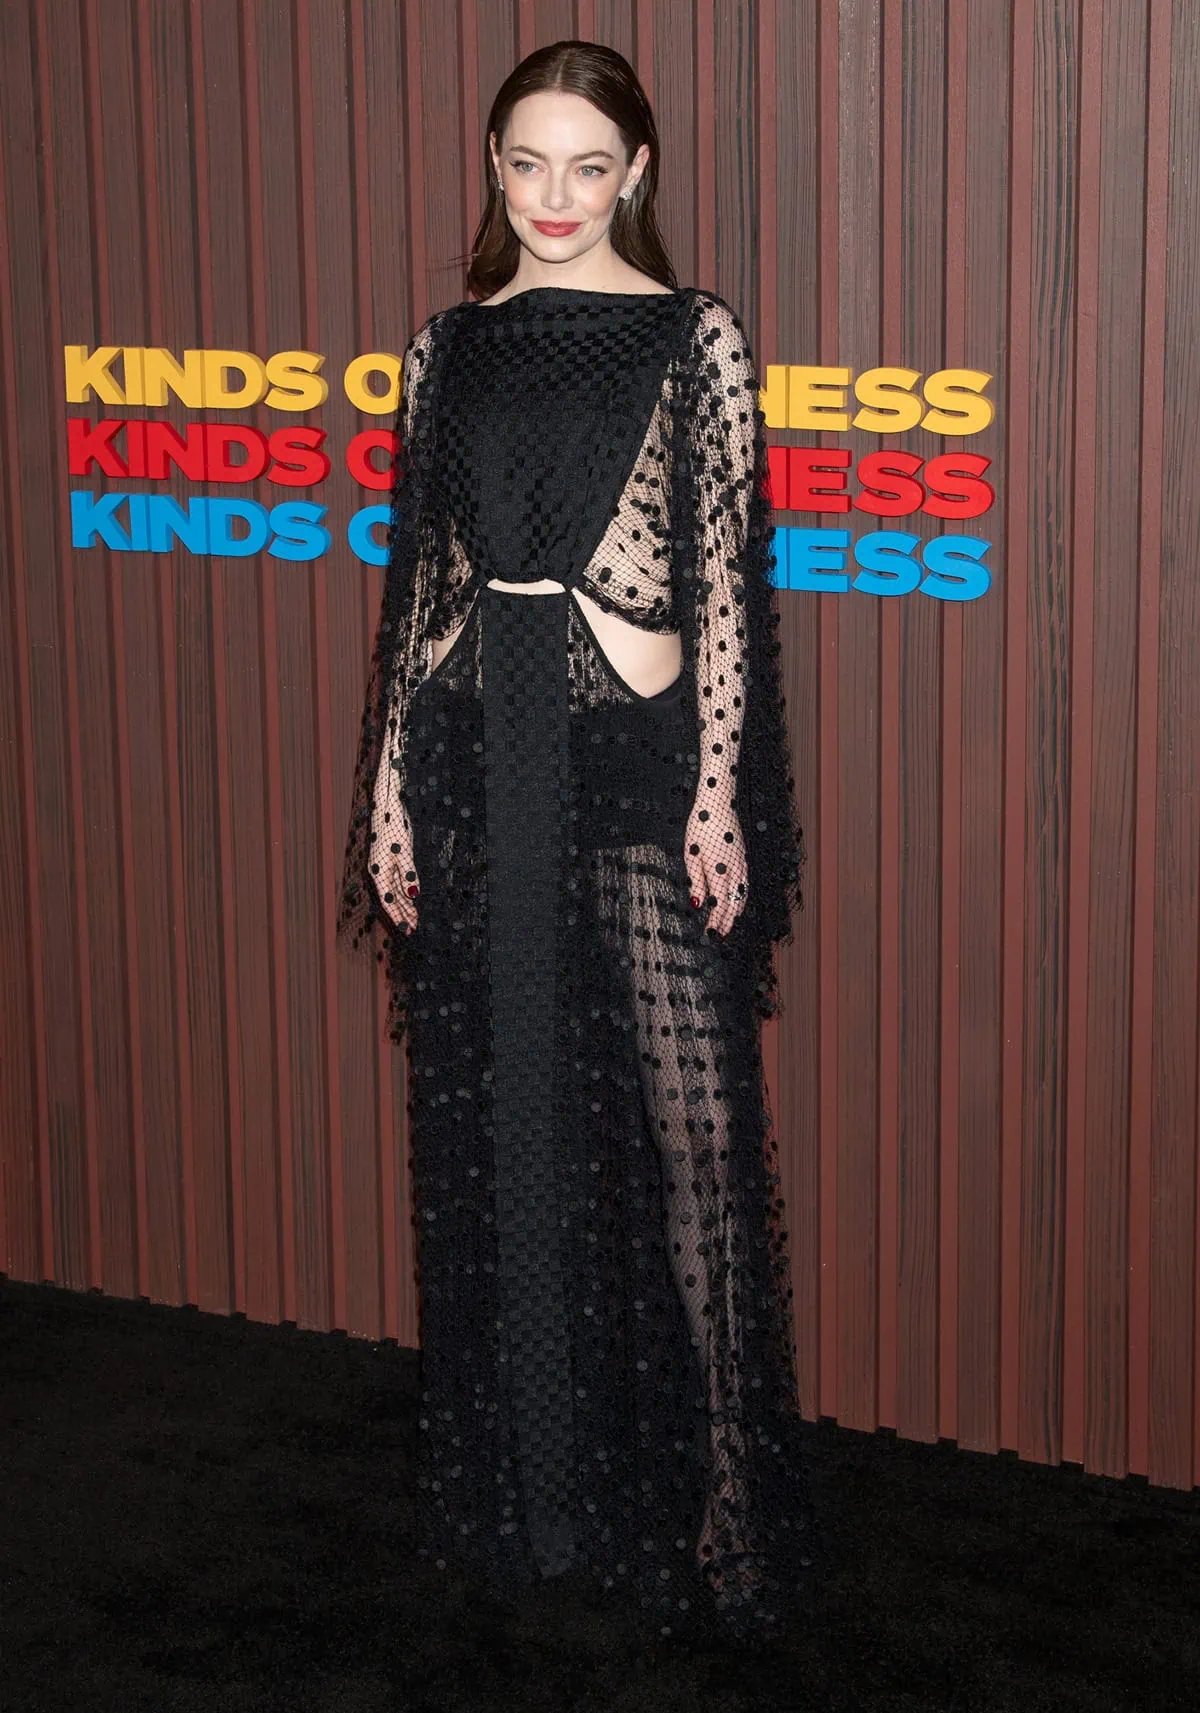 Emma Stone stuns in a sheer Louis Vuitton polka-dot gown, adding a bold and dramatic flair to the red carpet at the New York City premiere of "Kinds of Kindness"